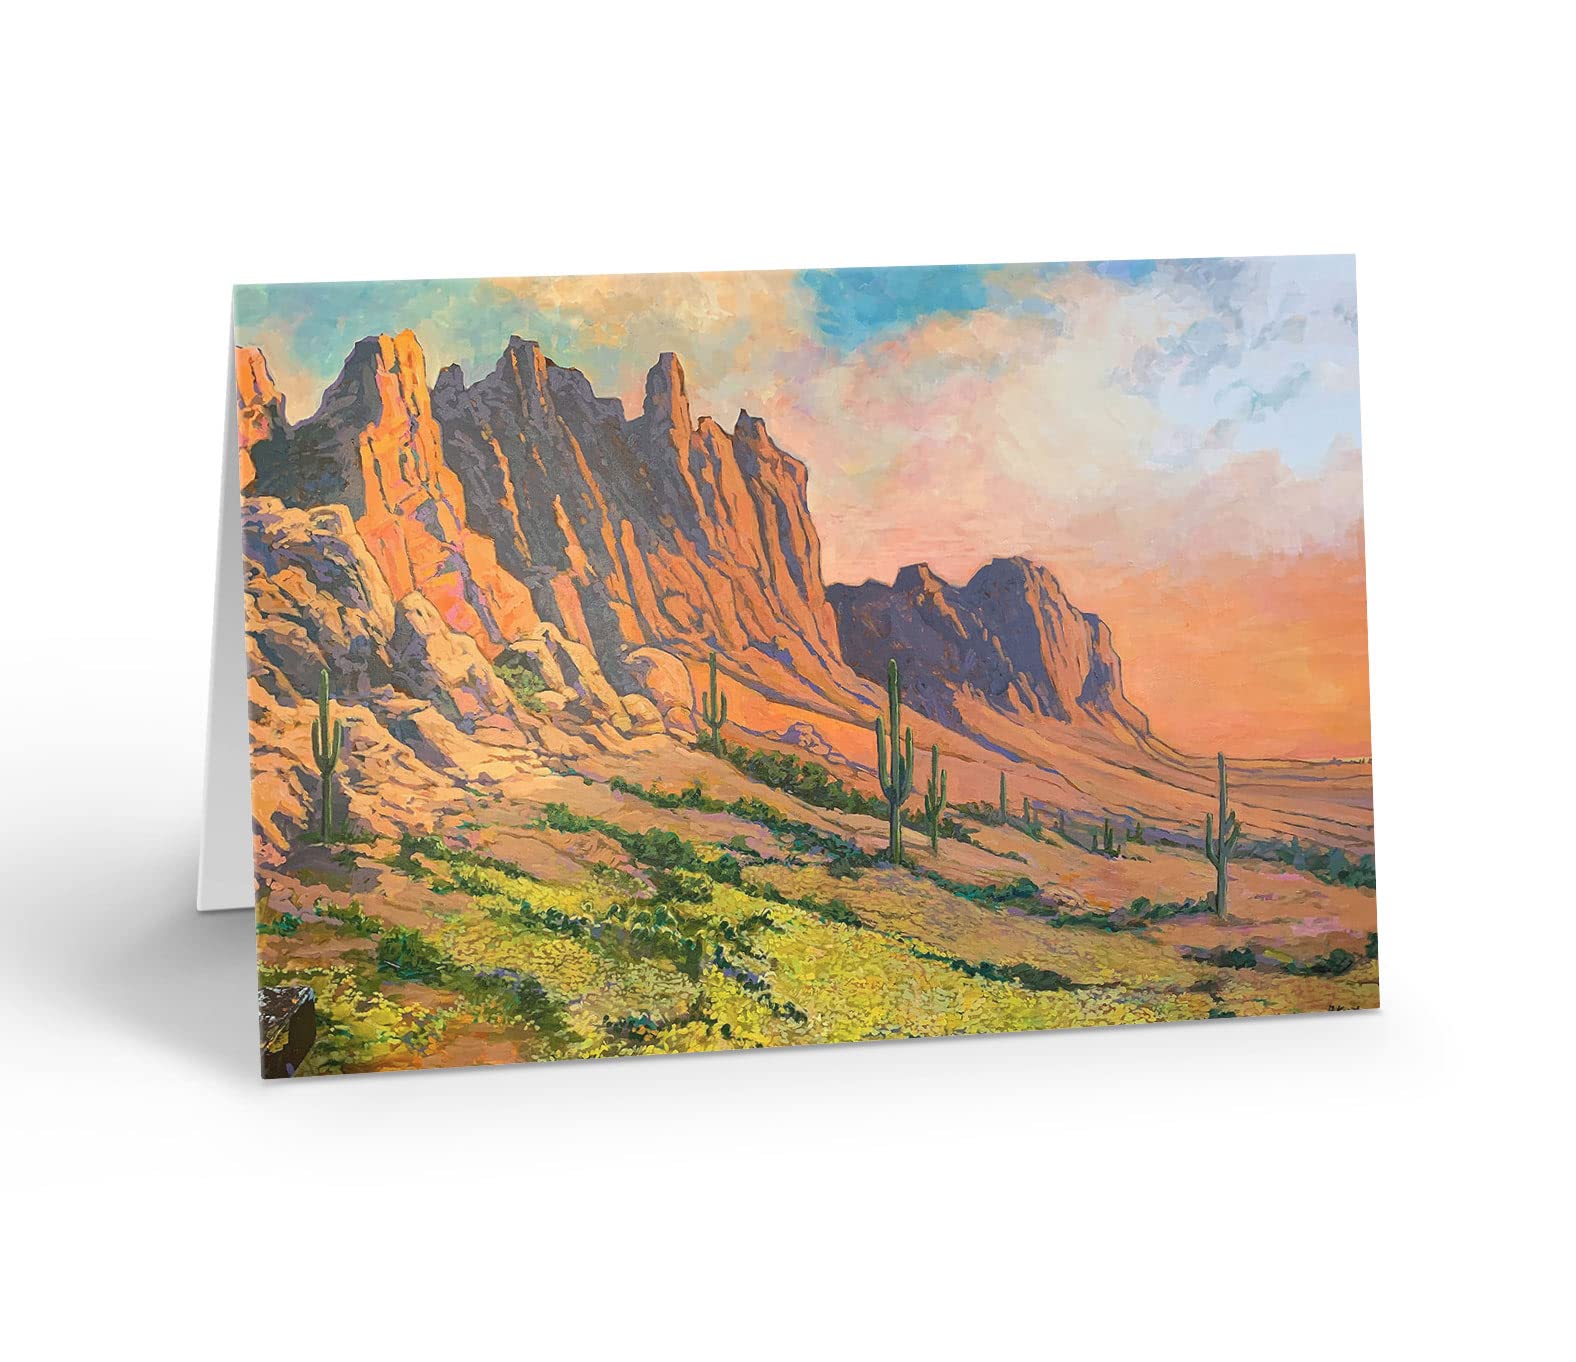 Stonehouse Collection | Arizona Mountain Note Cards - 10 Boxed Cards & Envelopes - Desert Mountain Note Cards (Assorted)